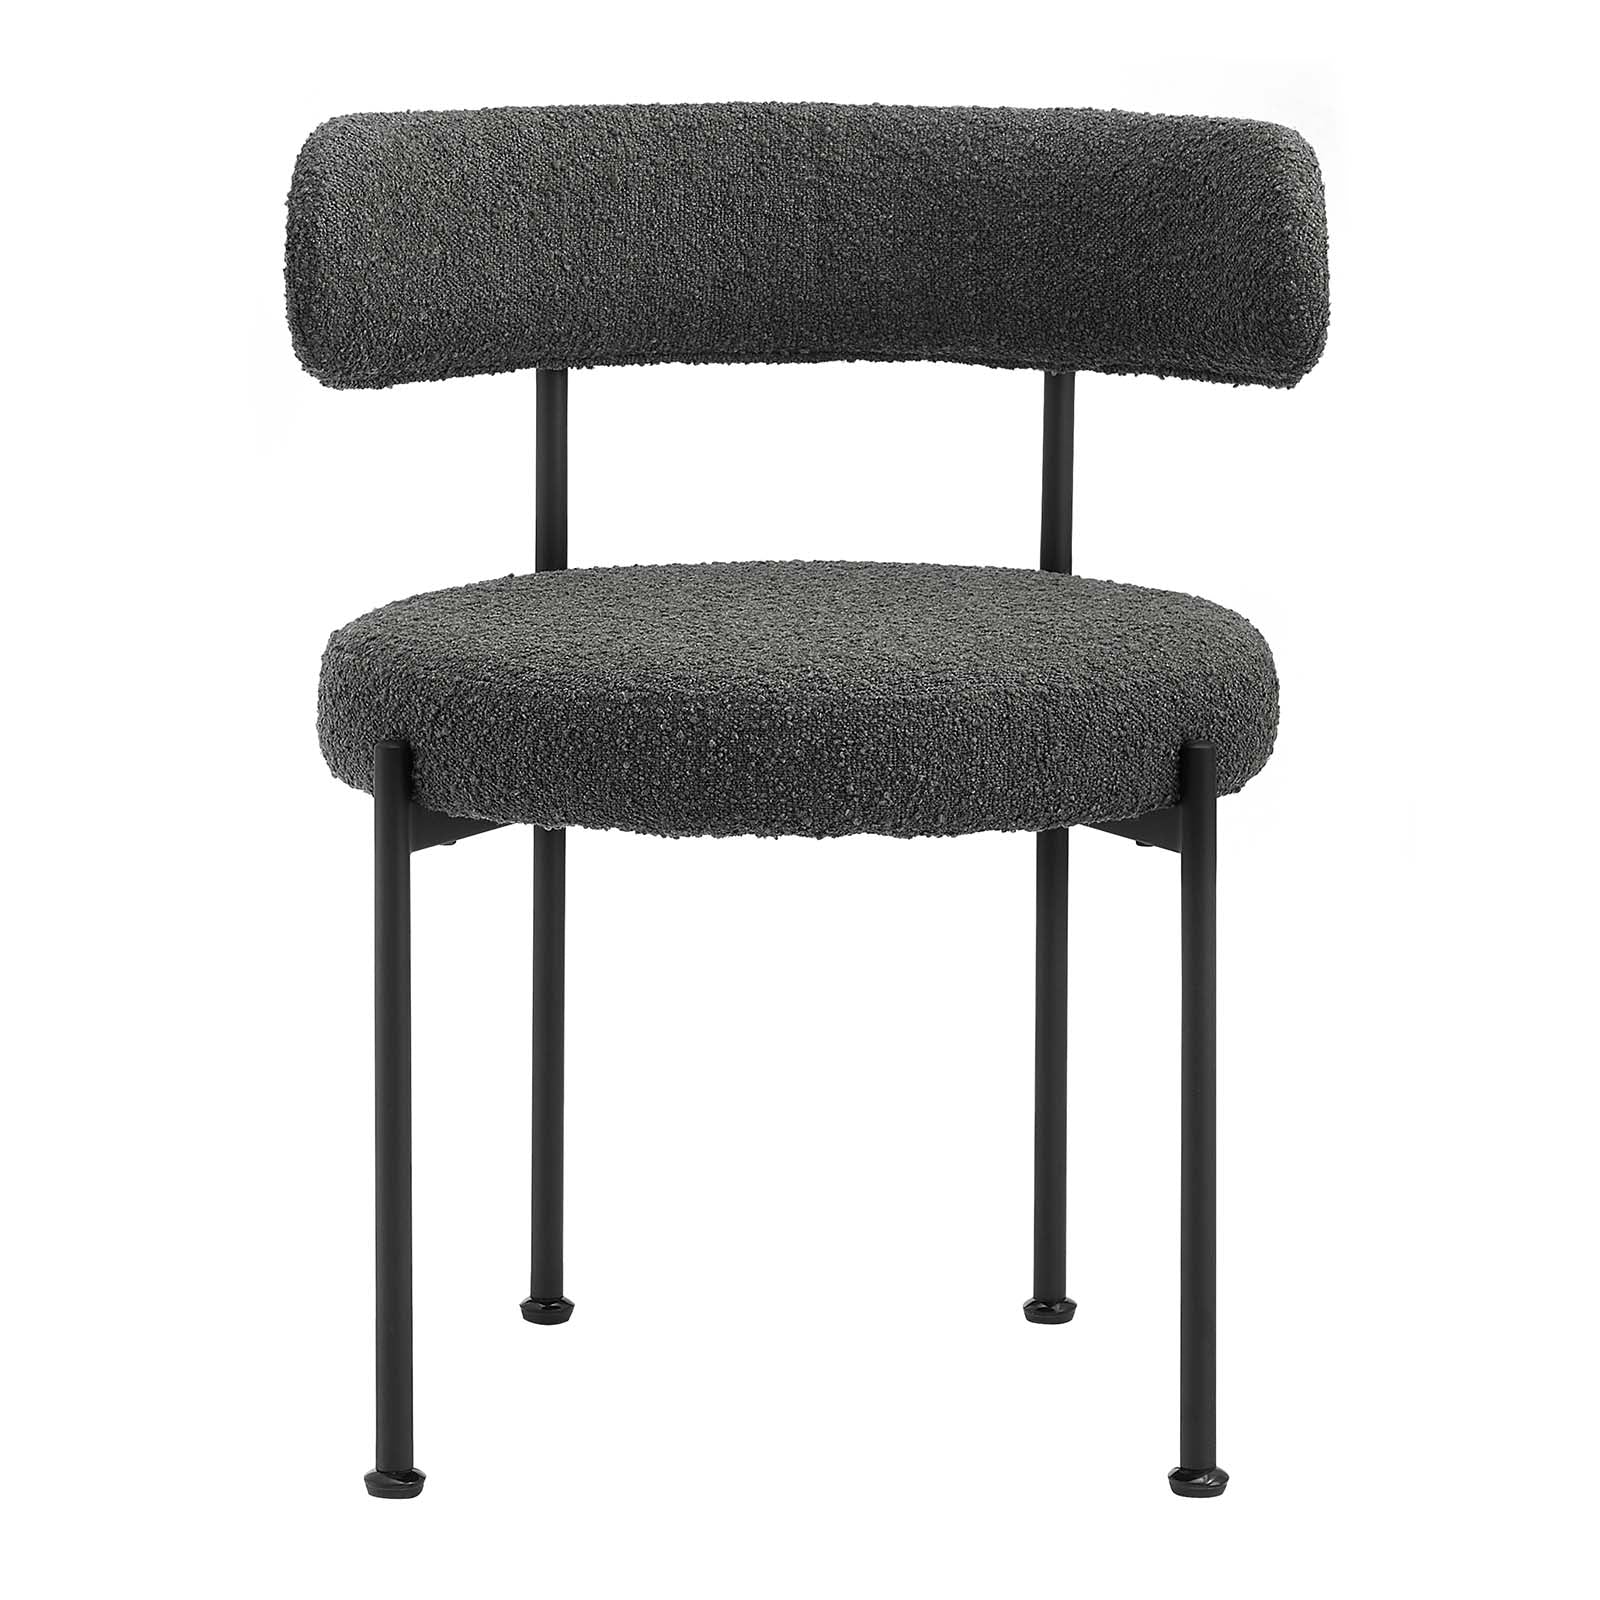 Albie Boucle Fabric Dining Chairs - Set of 2 - Elite Maison